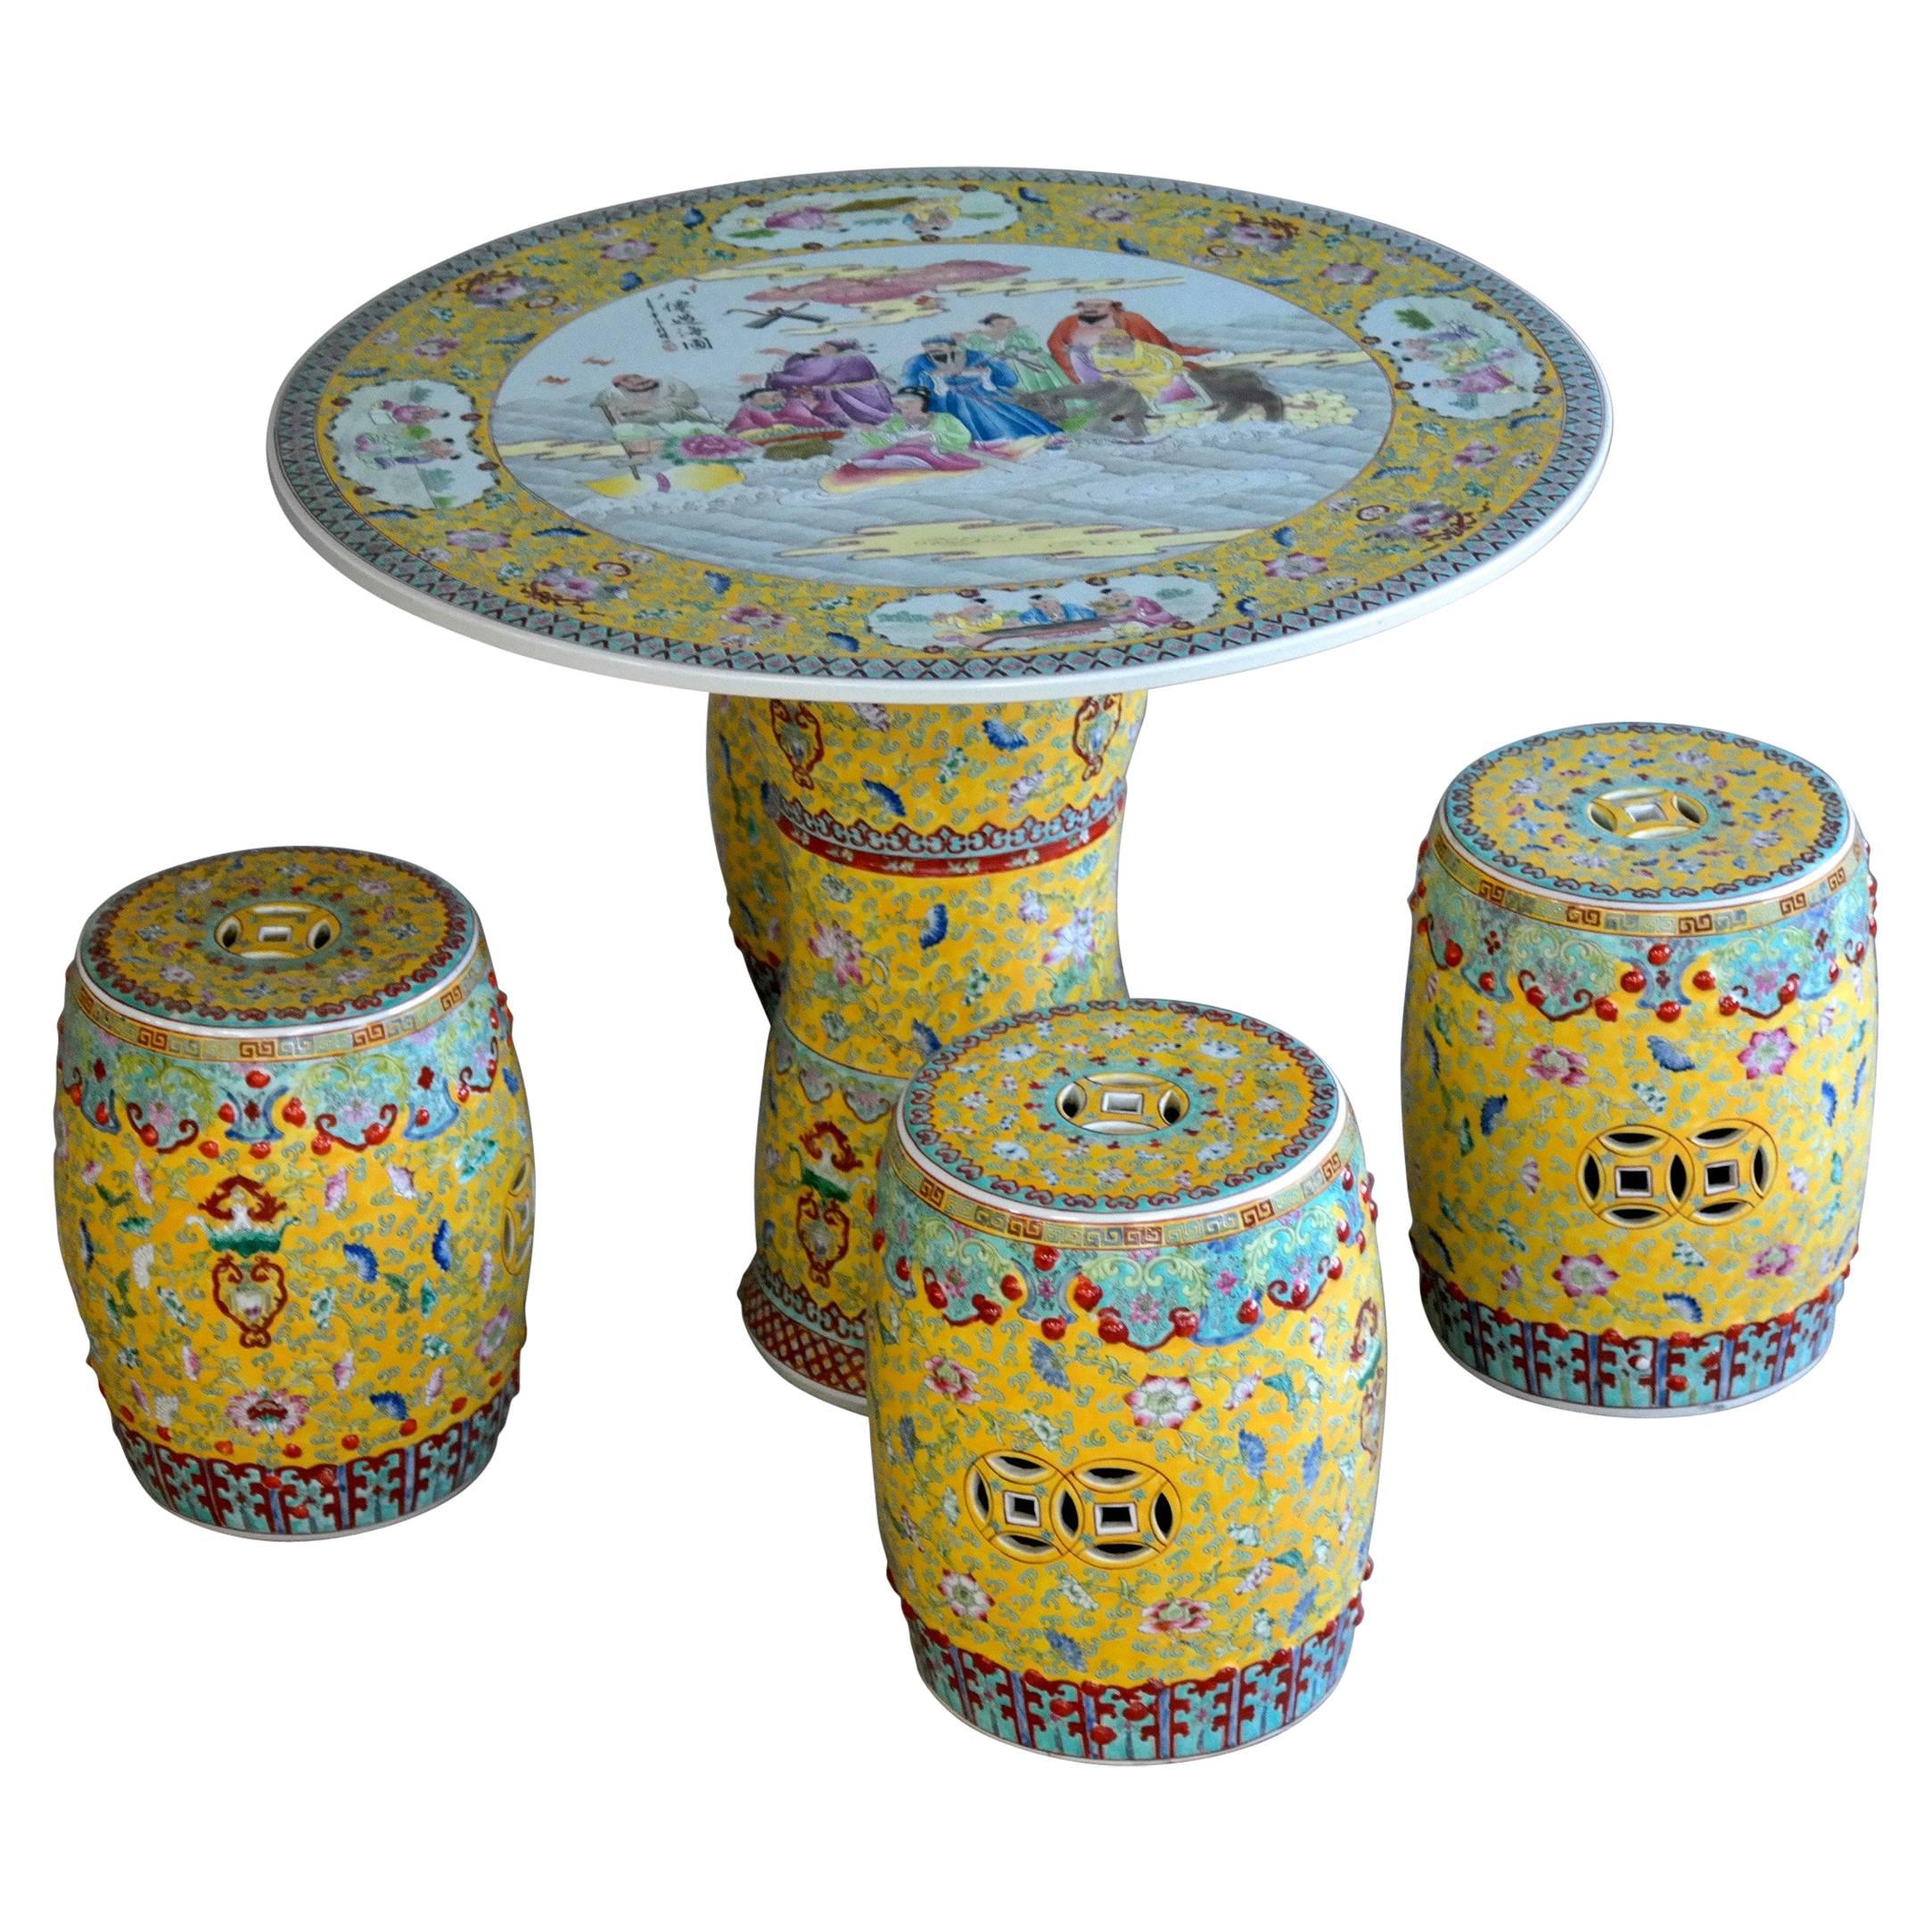  Garden Ceramic Porcelain Chinese Table with Stools